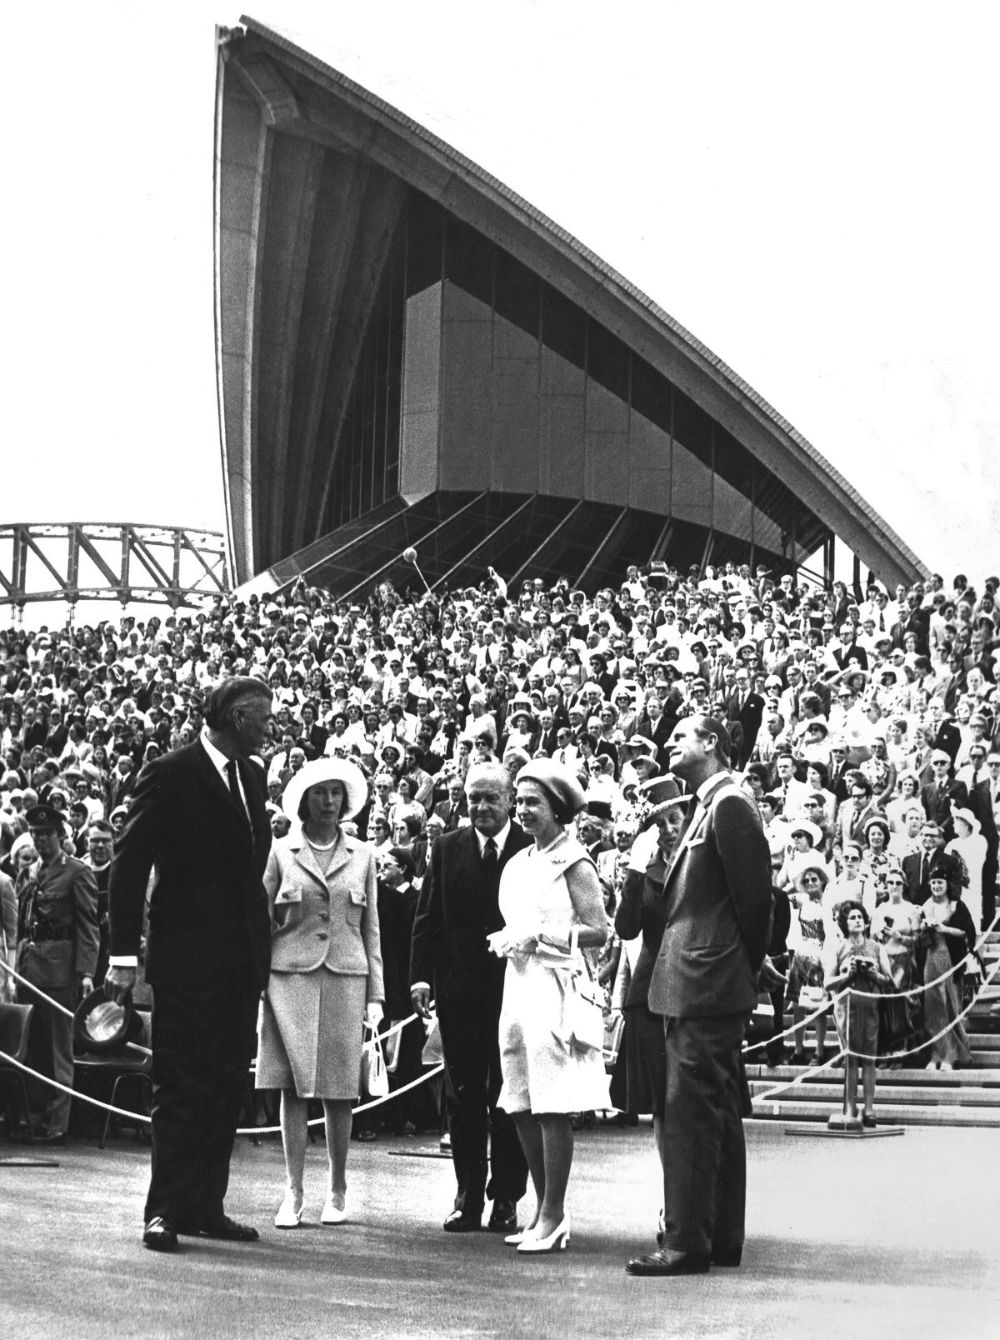 what years did the queen visit sydney australia